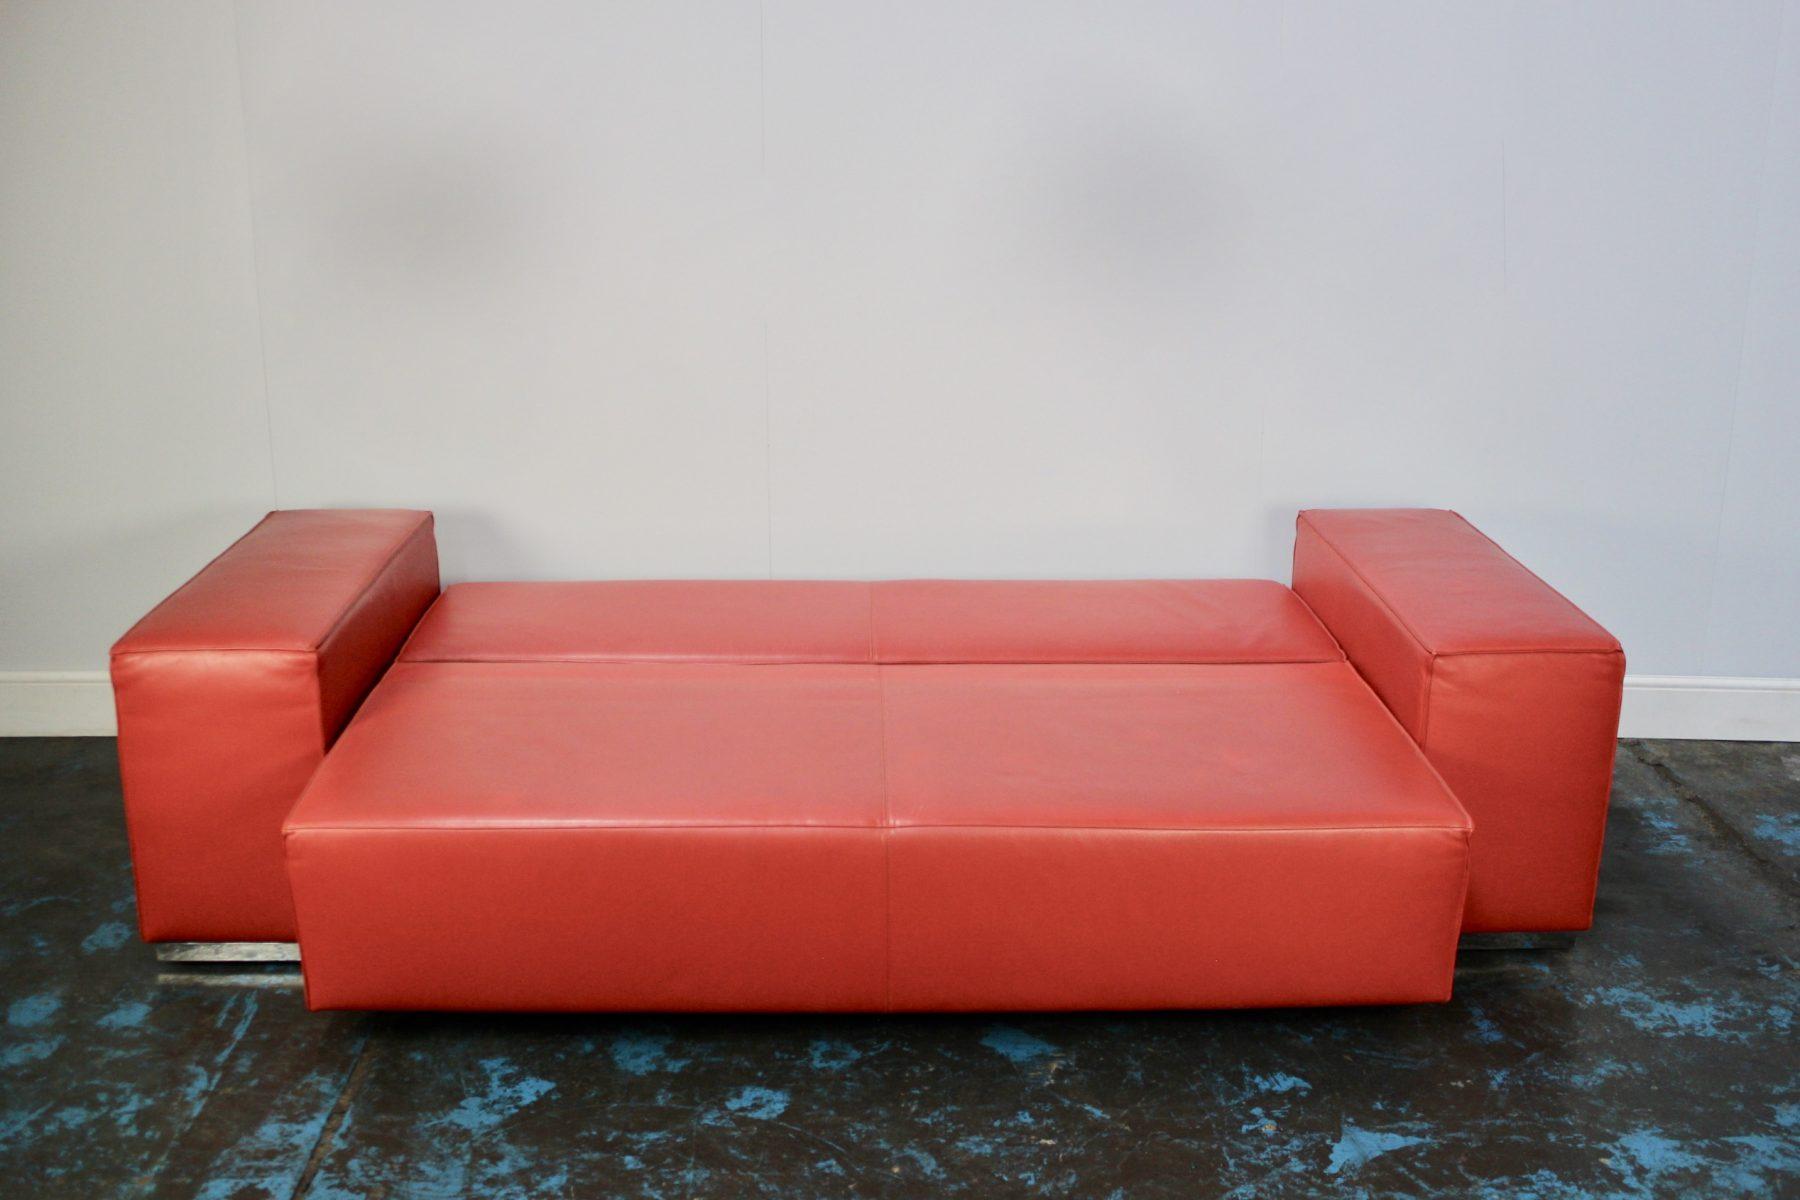 Cassina “Big Blox” 3-Seat Sofa Bed in Deep Red Leather In Good Condition In Barrowford, GB